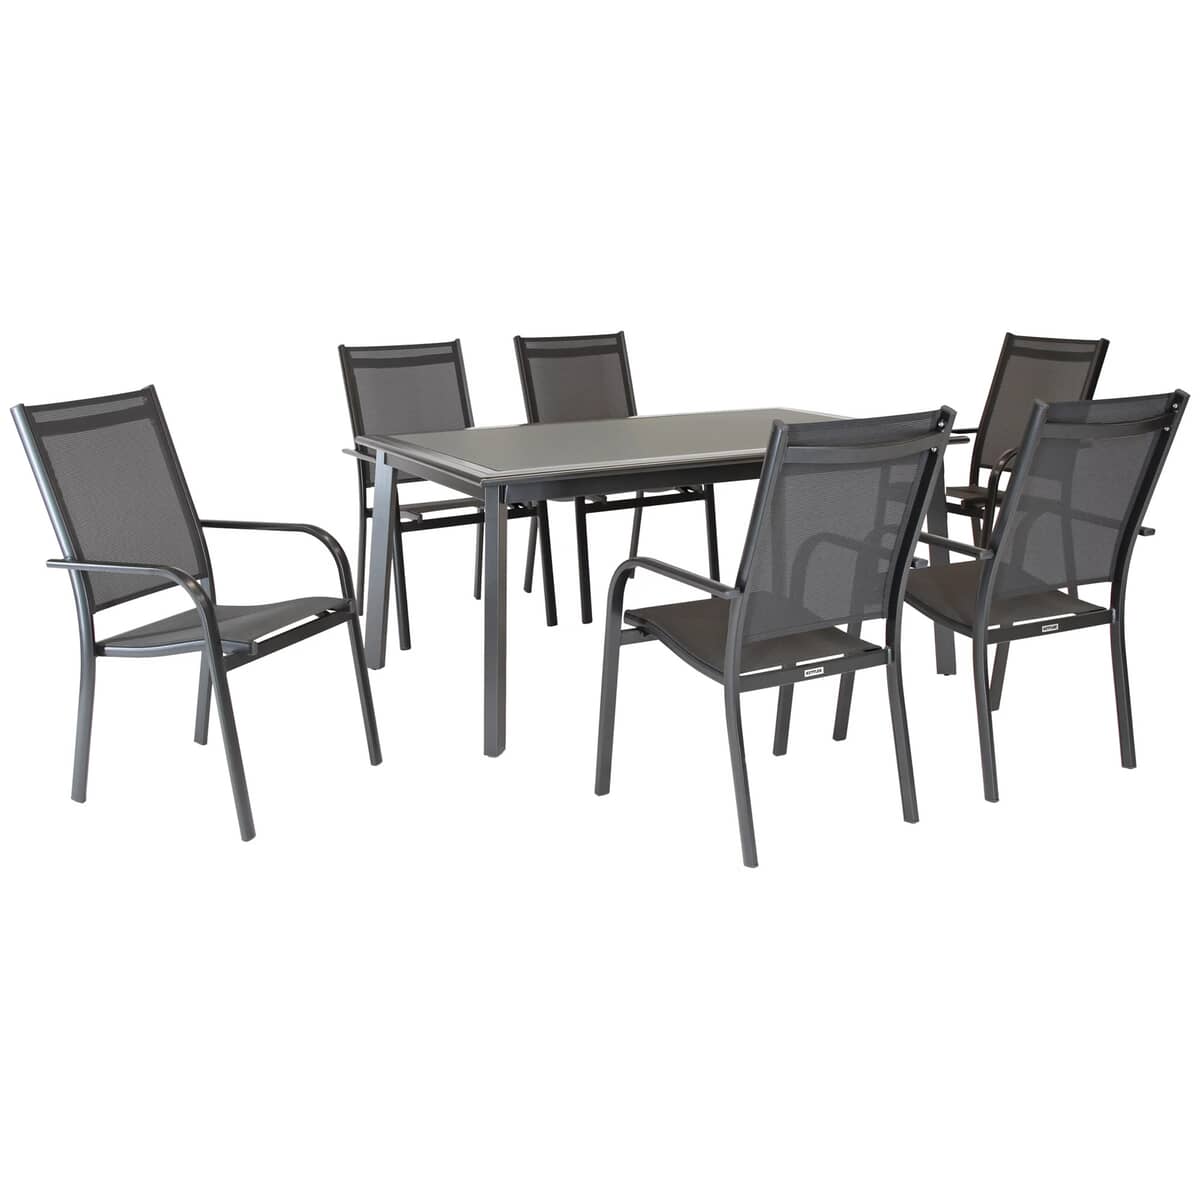 Kettler Surf 6 Seat Frosted Top Dining Table Set with 6 Stacking Chairs